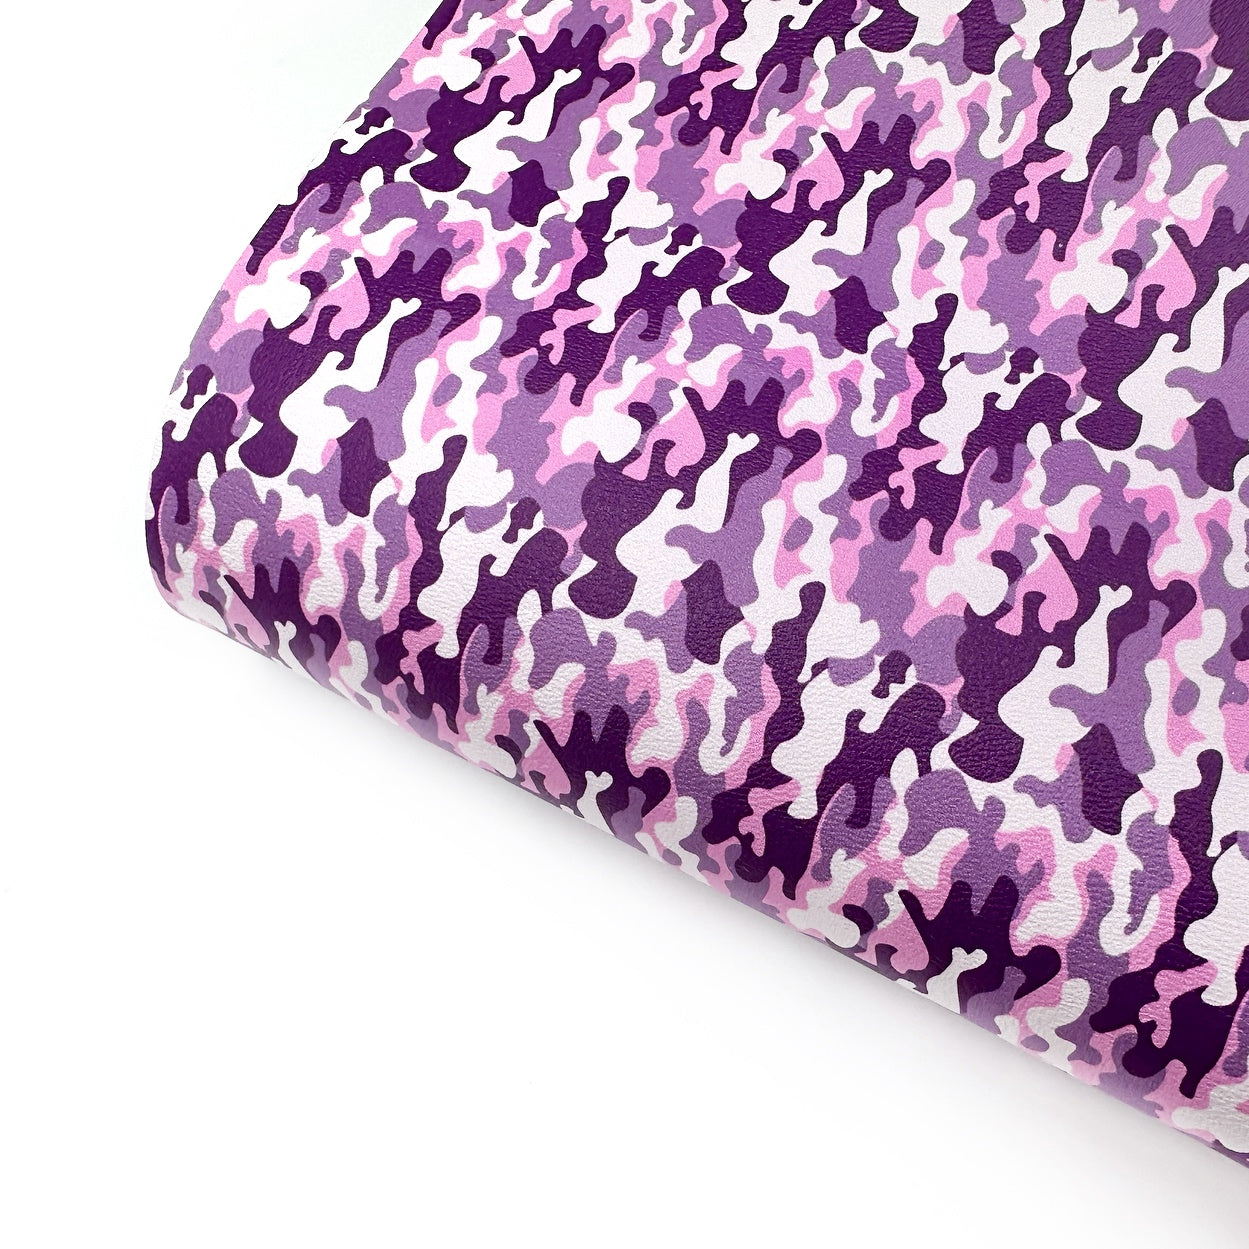 Pinky Camo Girl Premium Faux Leather Fabric Sheets